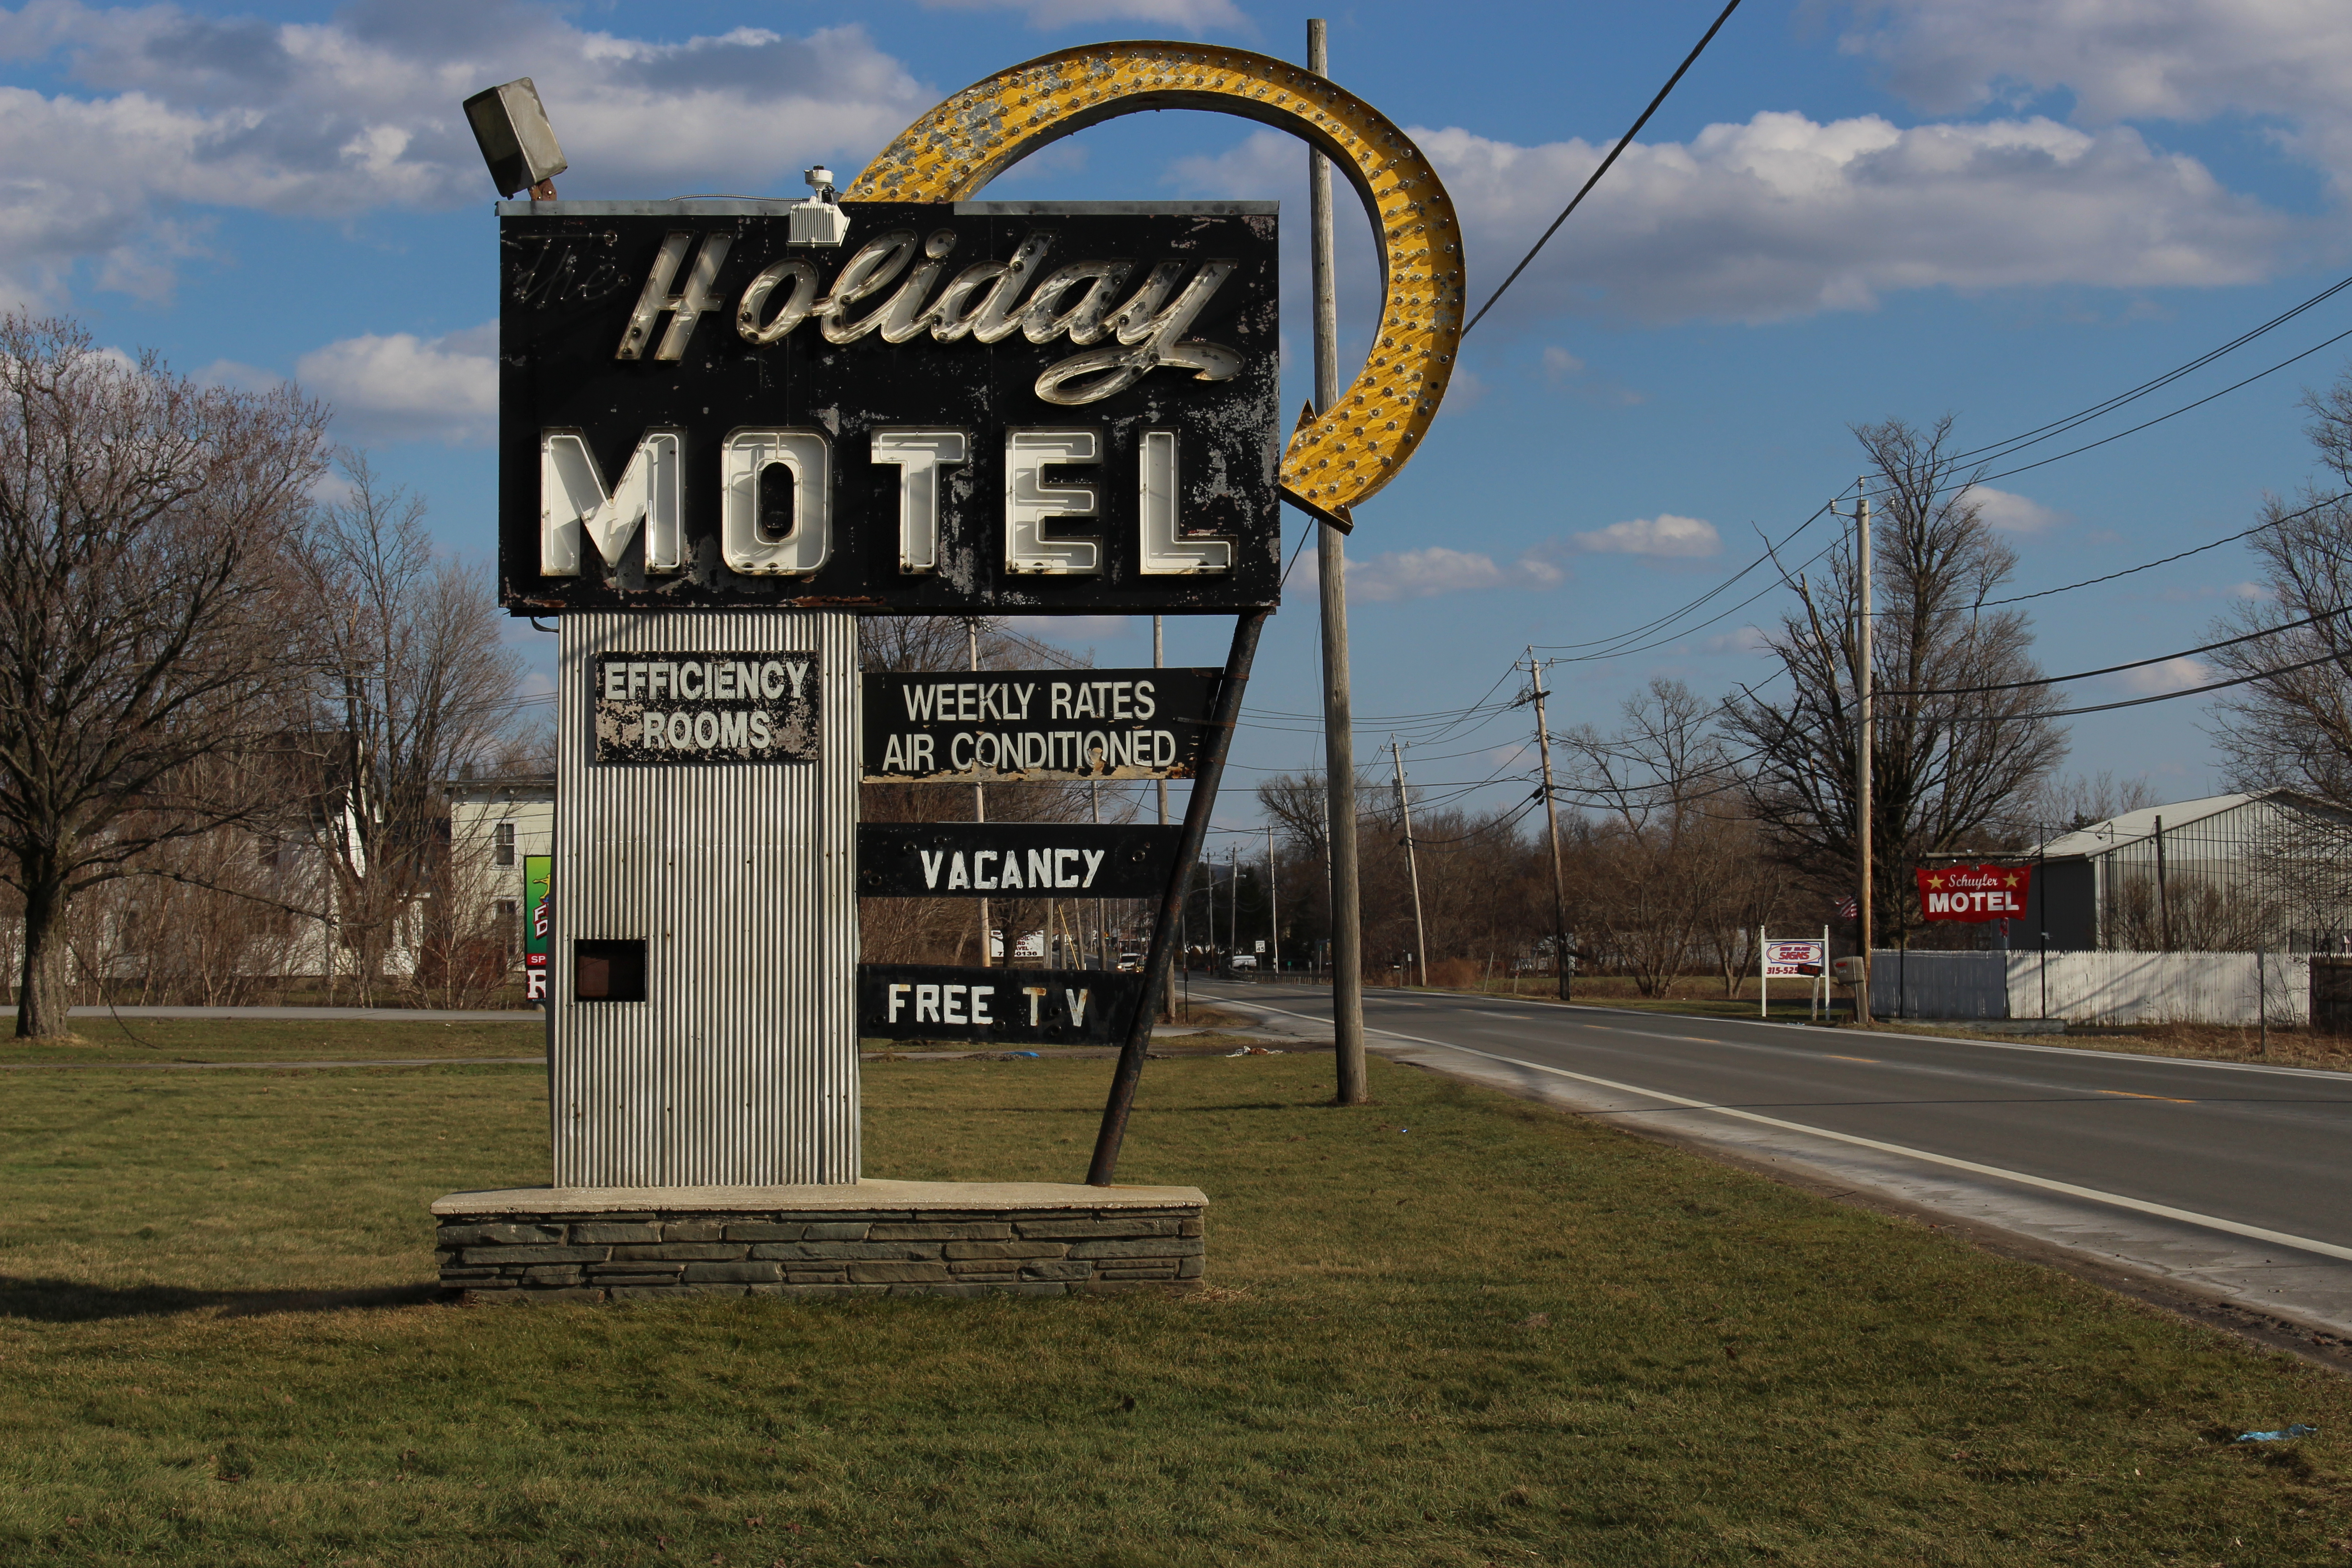 Holiday Motel - 2389 New York State Route 5, Utica, New York U.S.A. - February 27, 2017